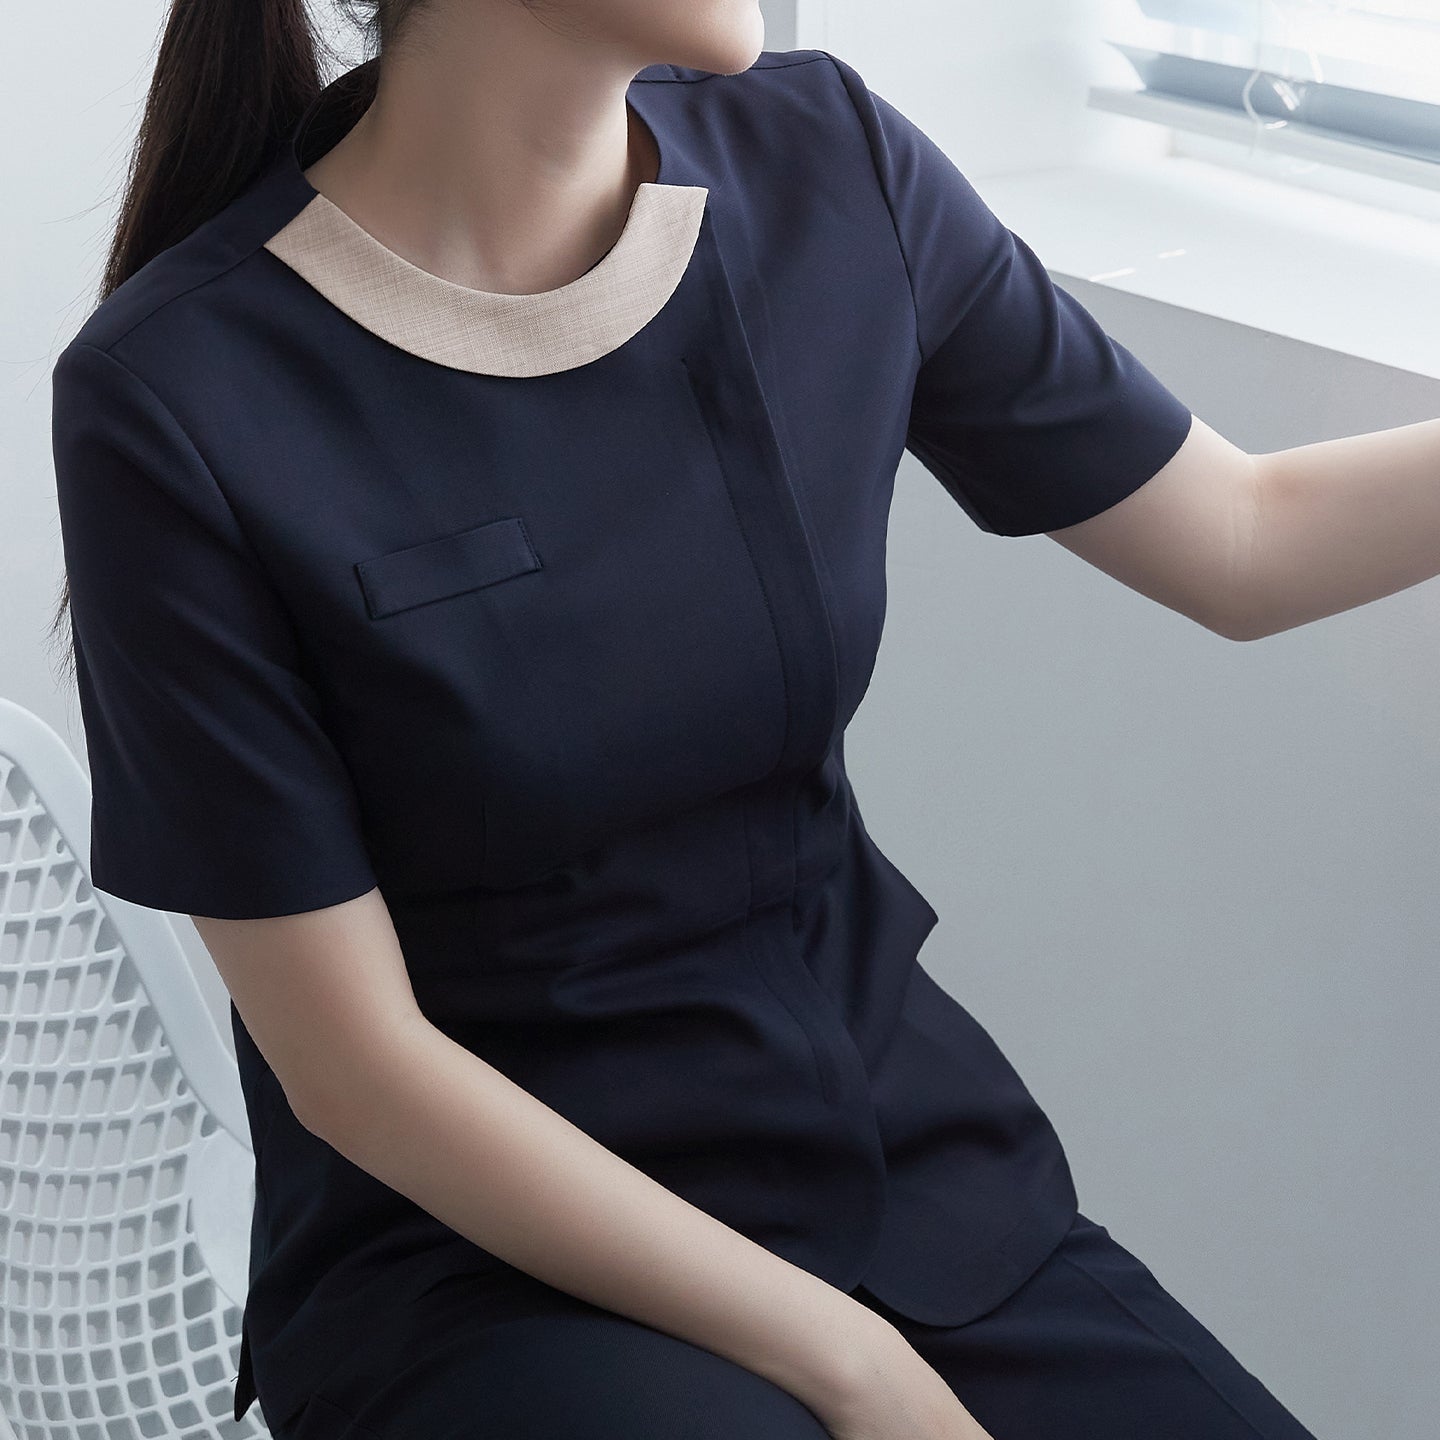 A woman wearing a navy round-neck front zipper top with a contrasting beige collar, sitting by a window,Navy